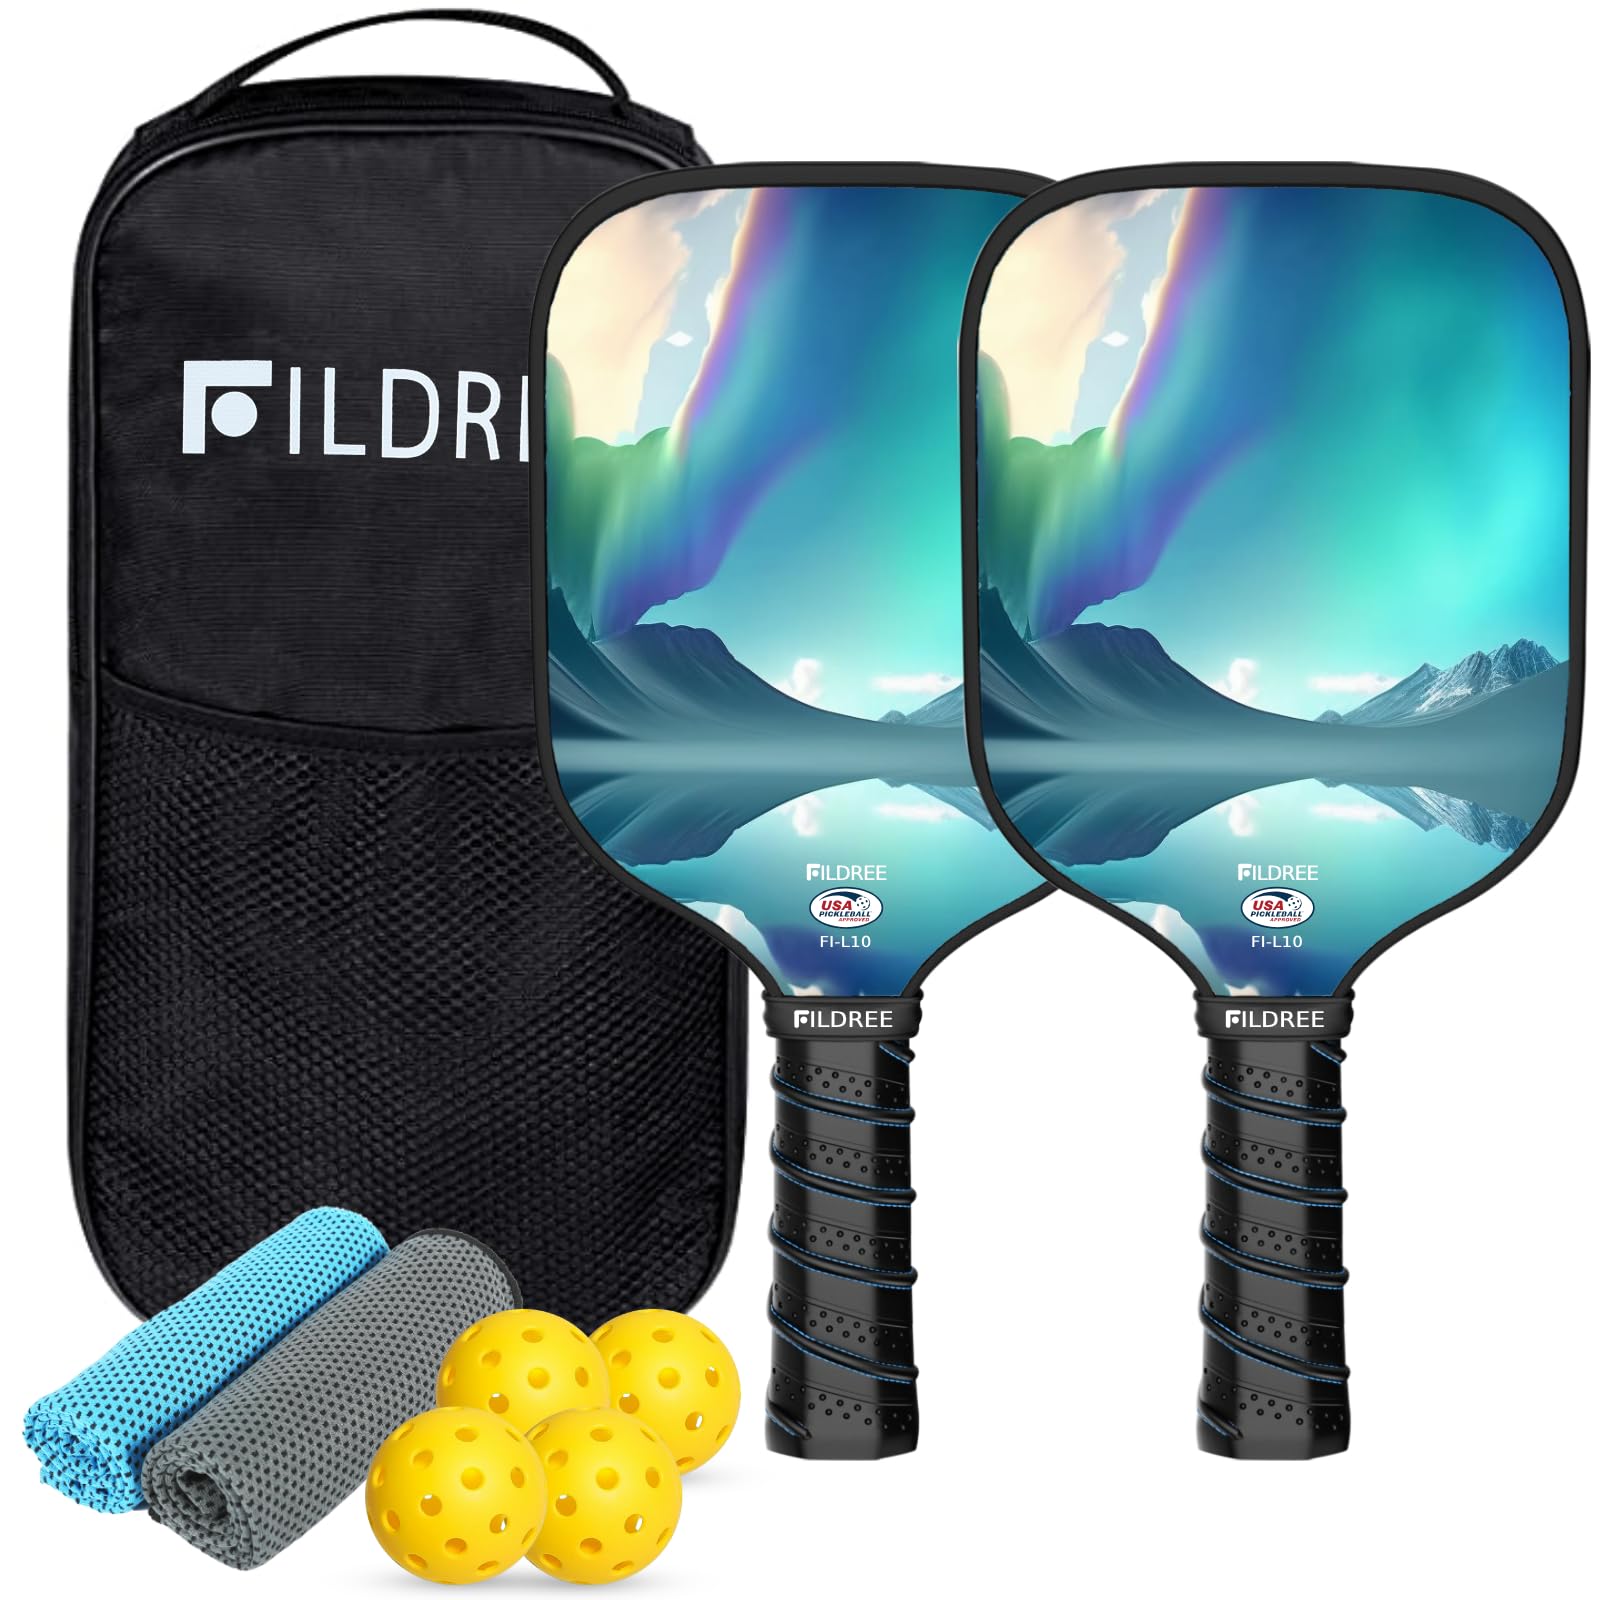 Pickleball Paddles set. 14.99, FS with Prime. Woot@Amazon $14.99